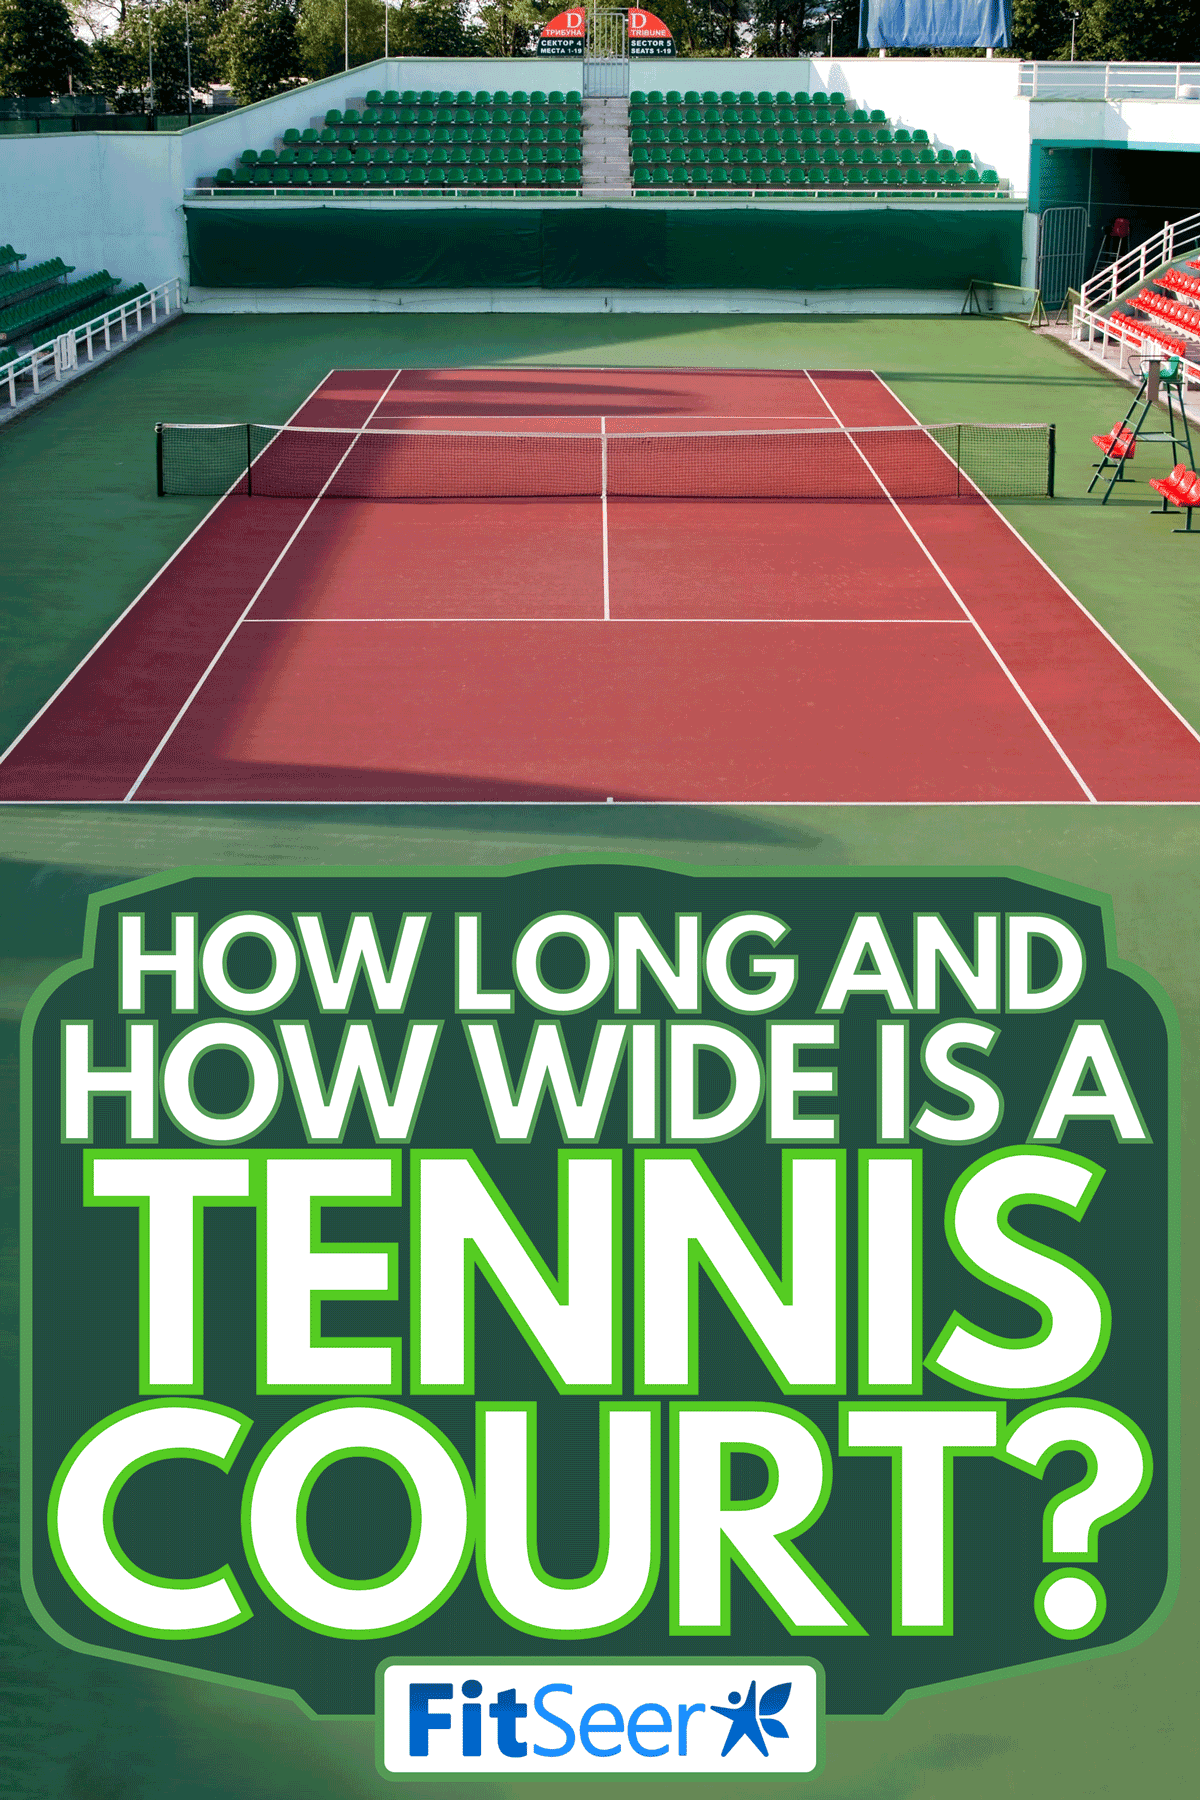 A sports tennis arena, How Long And How Wide Is A Tennis Court?